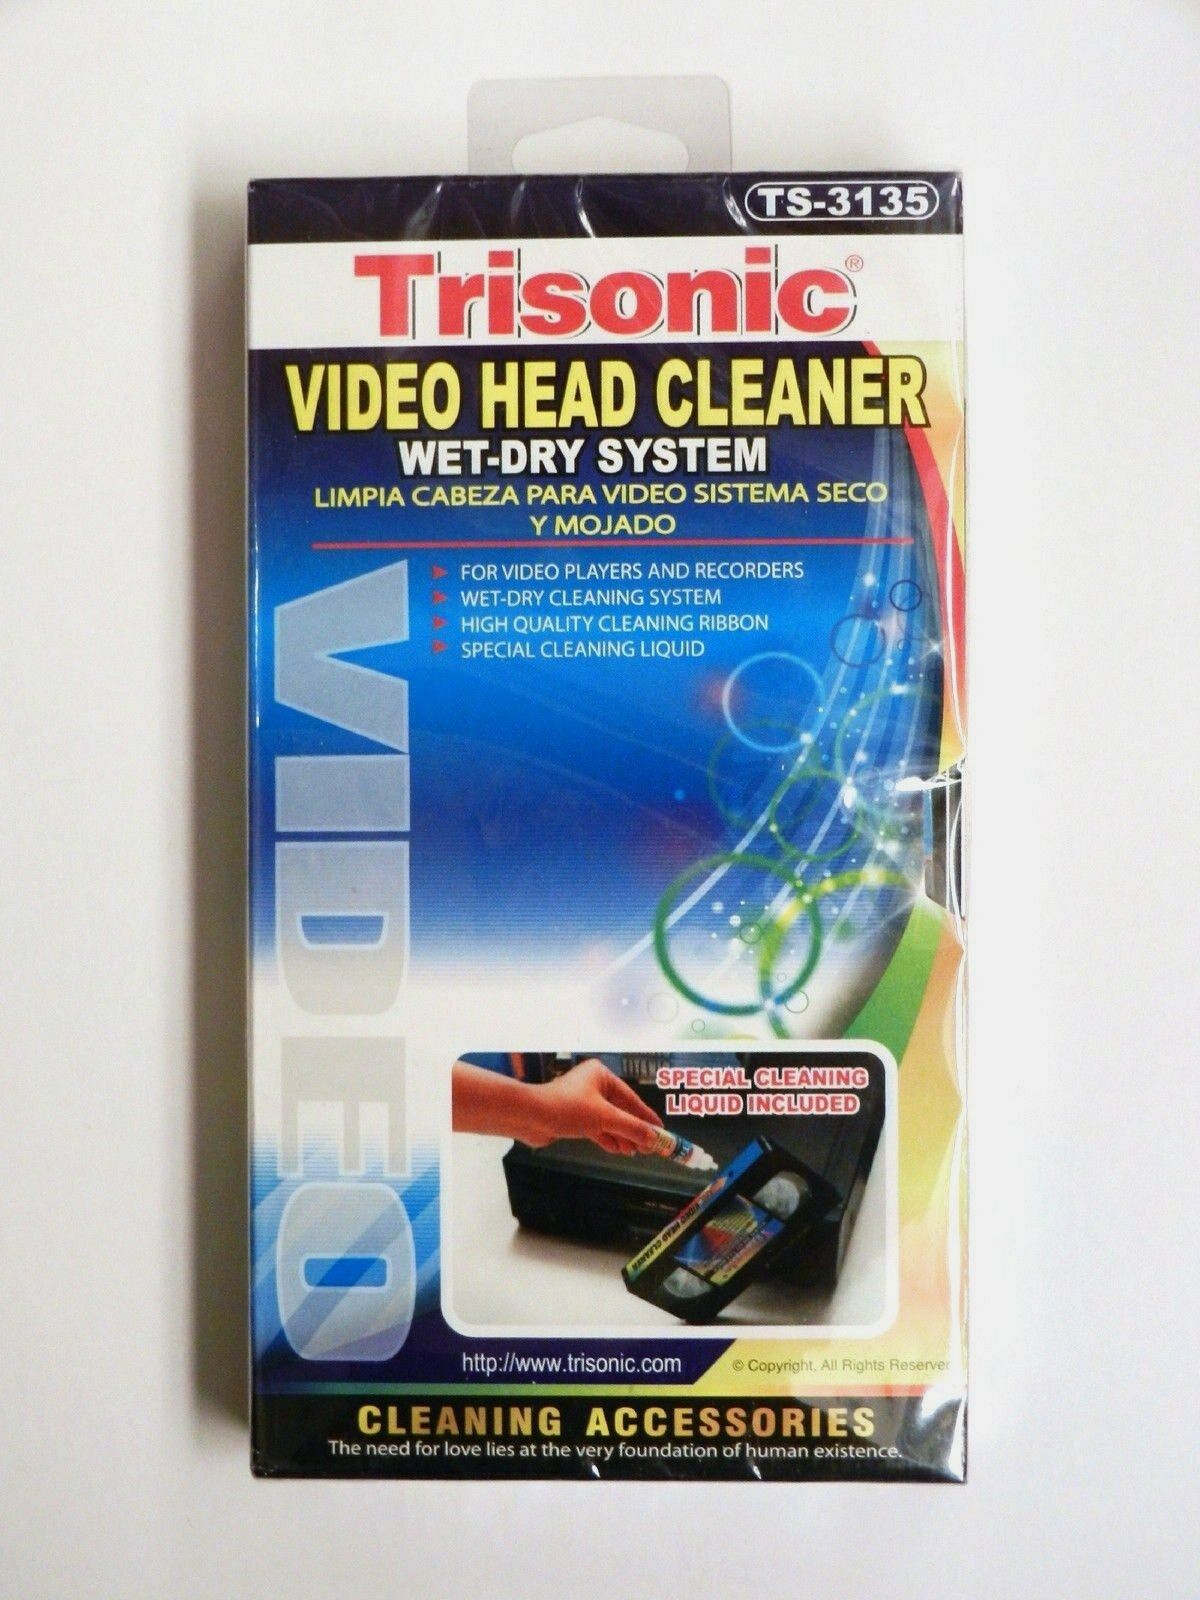 Vhs Vcr Video Head Cleaner Wet Dry For Video Players And Recorders